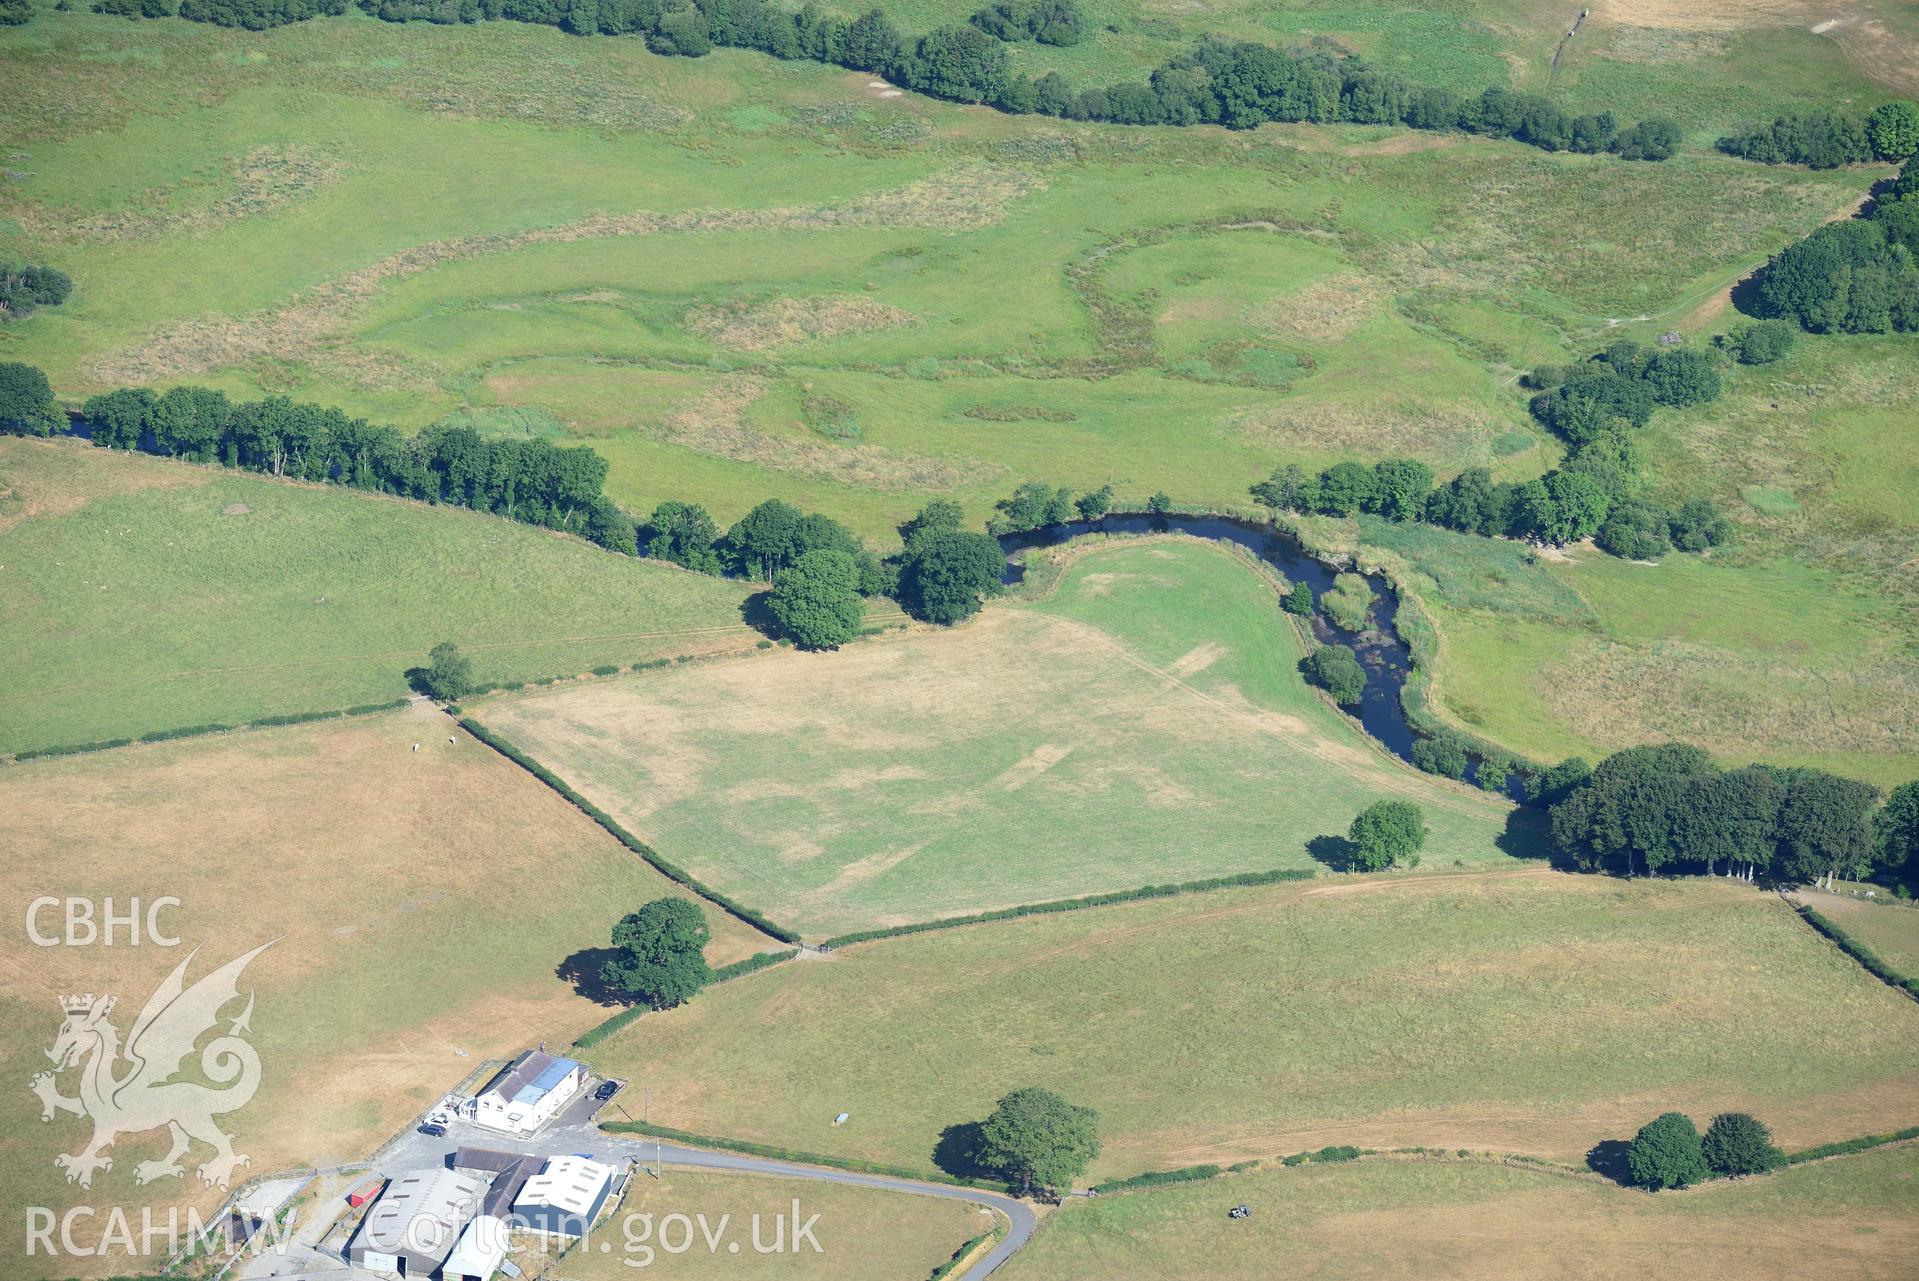 Royal Commission aerial photography of the Roman road approaching Llanio Roman fort taken on 19th July 2018 during the 2018 drought.